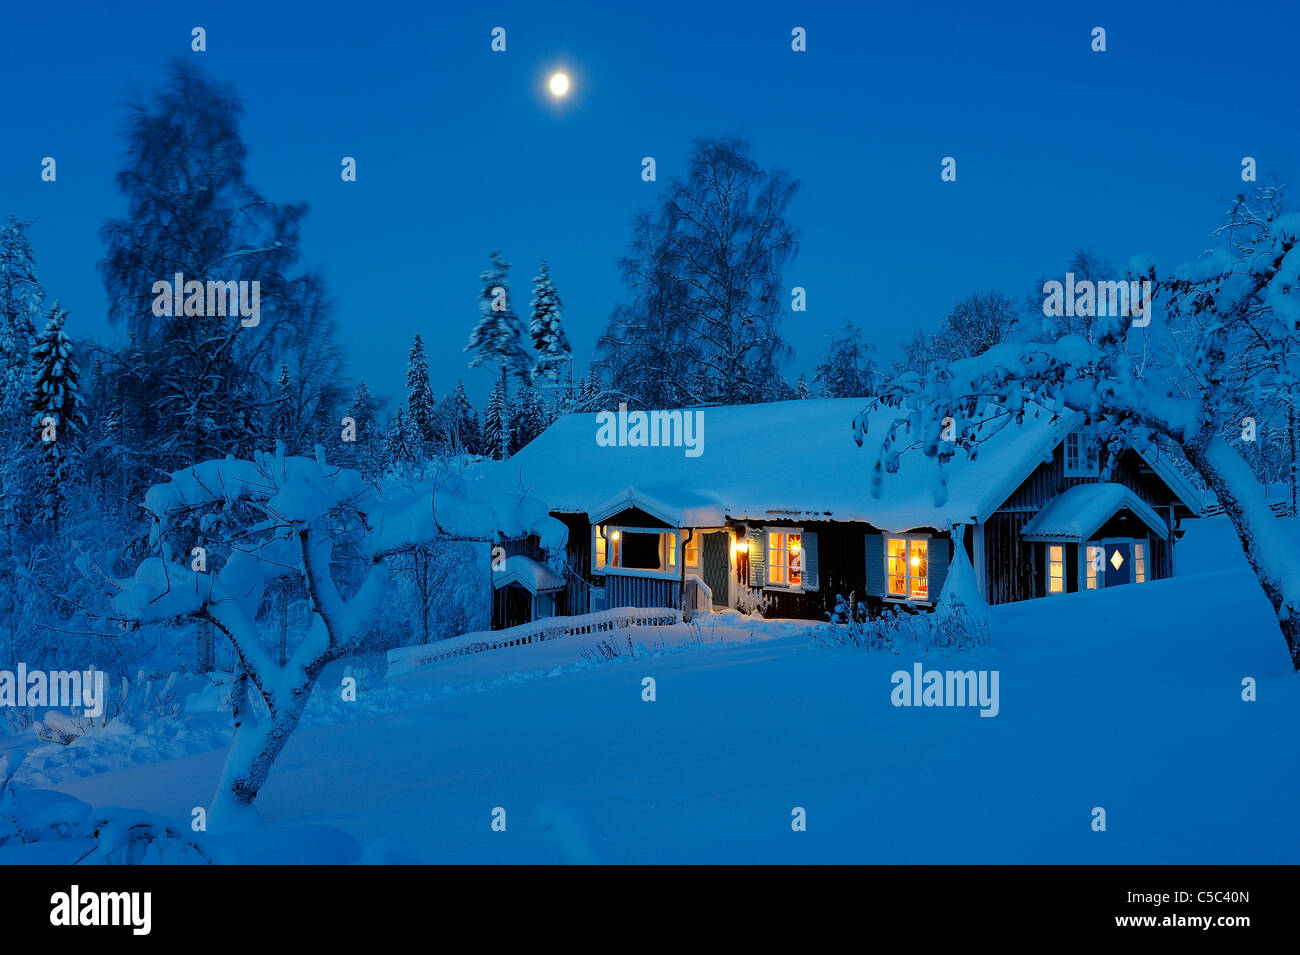 Country house in ambiente invernale di notte Foto Stock